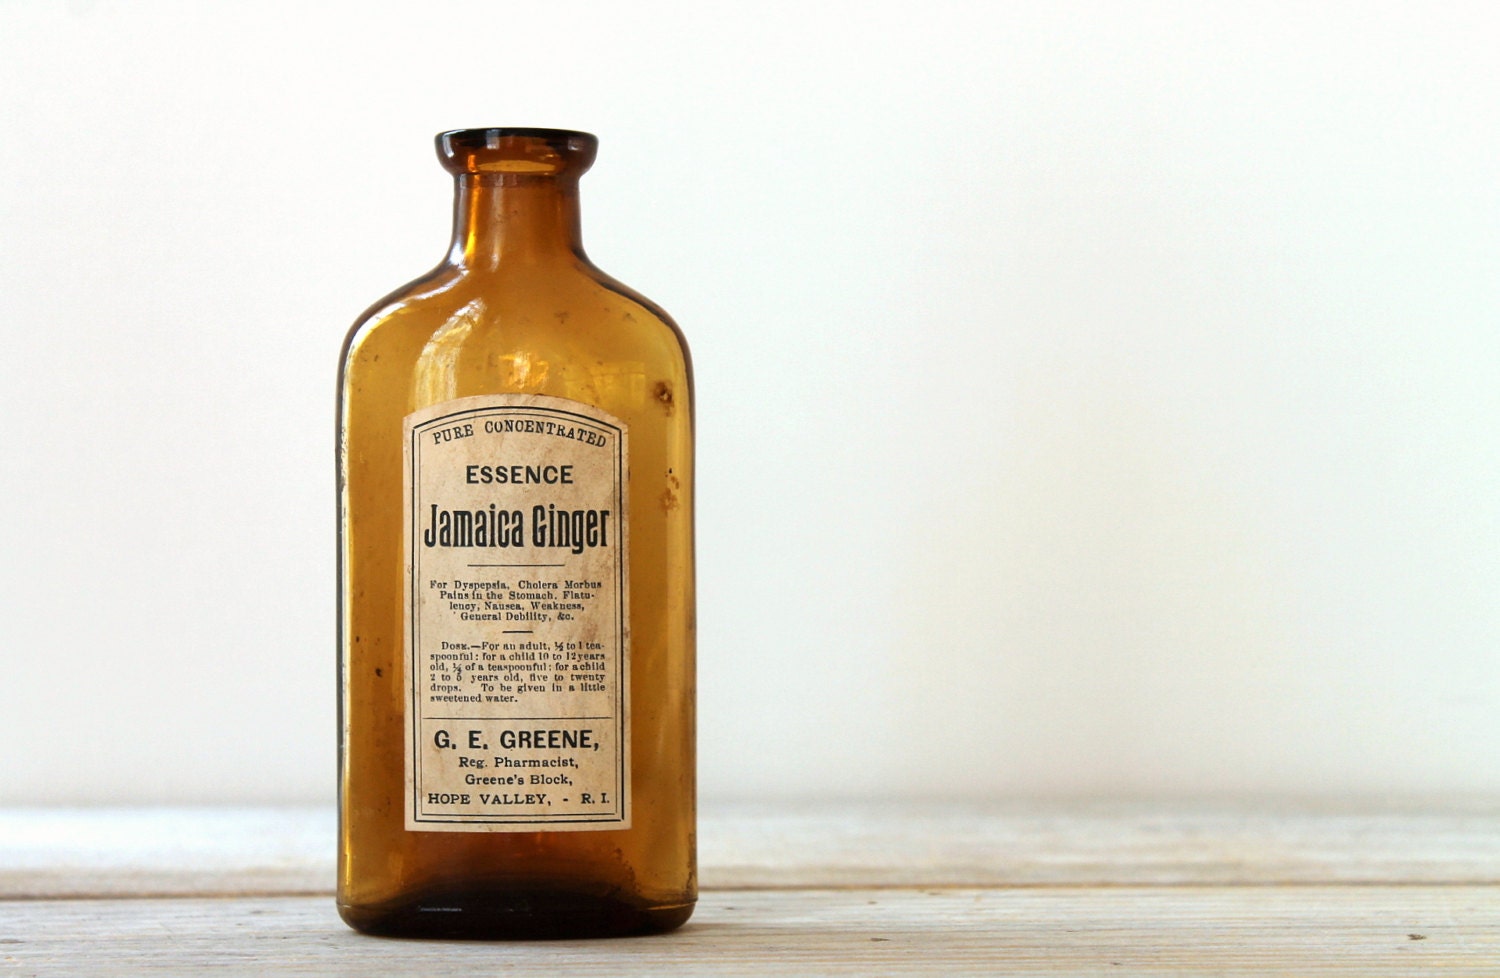 What can you use old glass medicine bottles for?